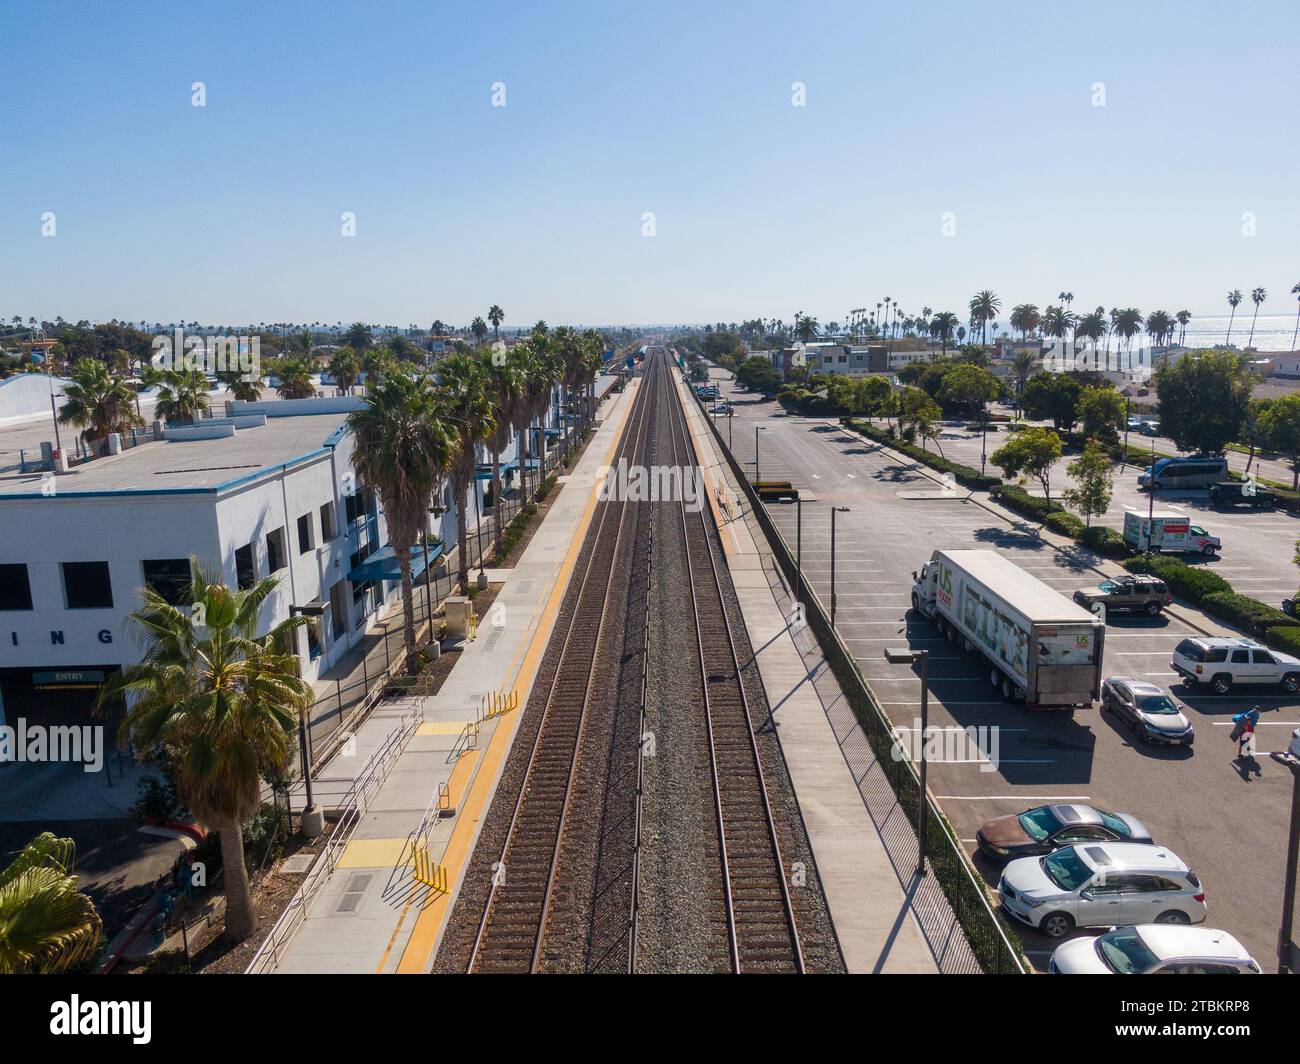 Drone Photo of Passenger Trains in Oceanside and Del Mar California Stock Photo